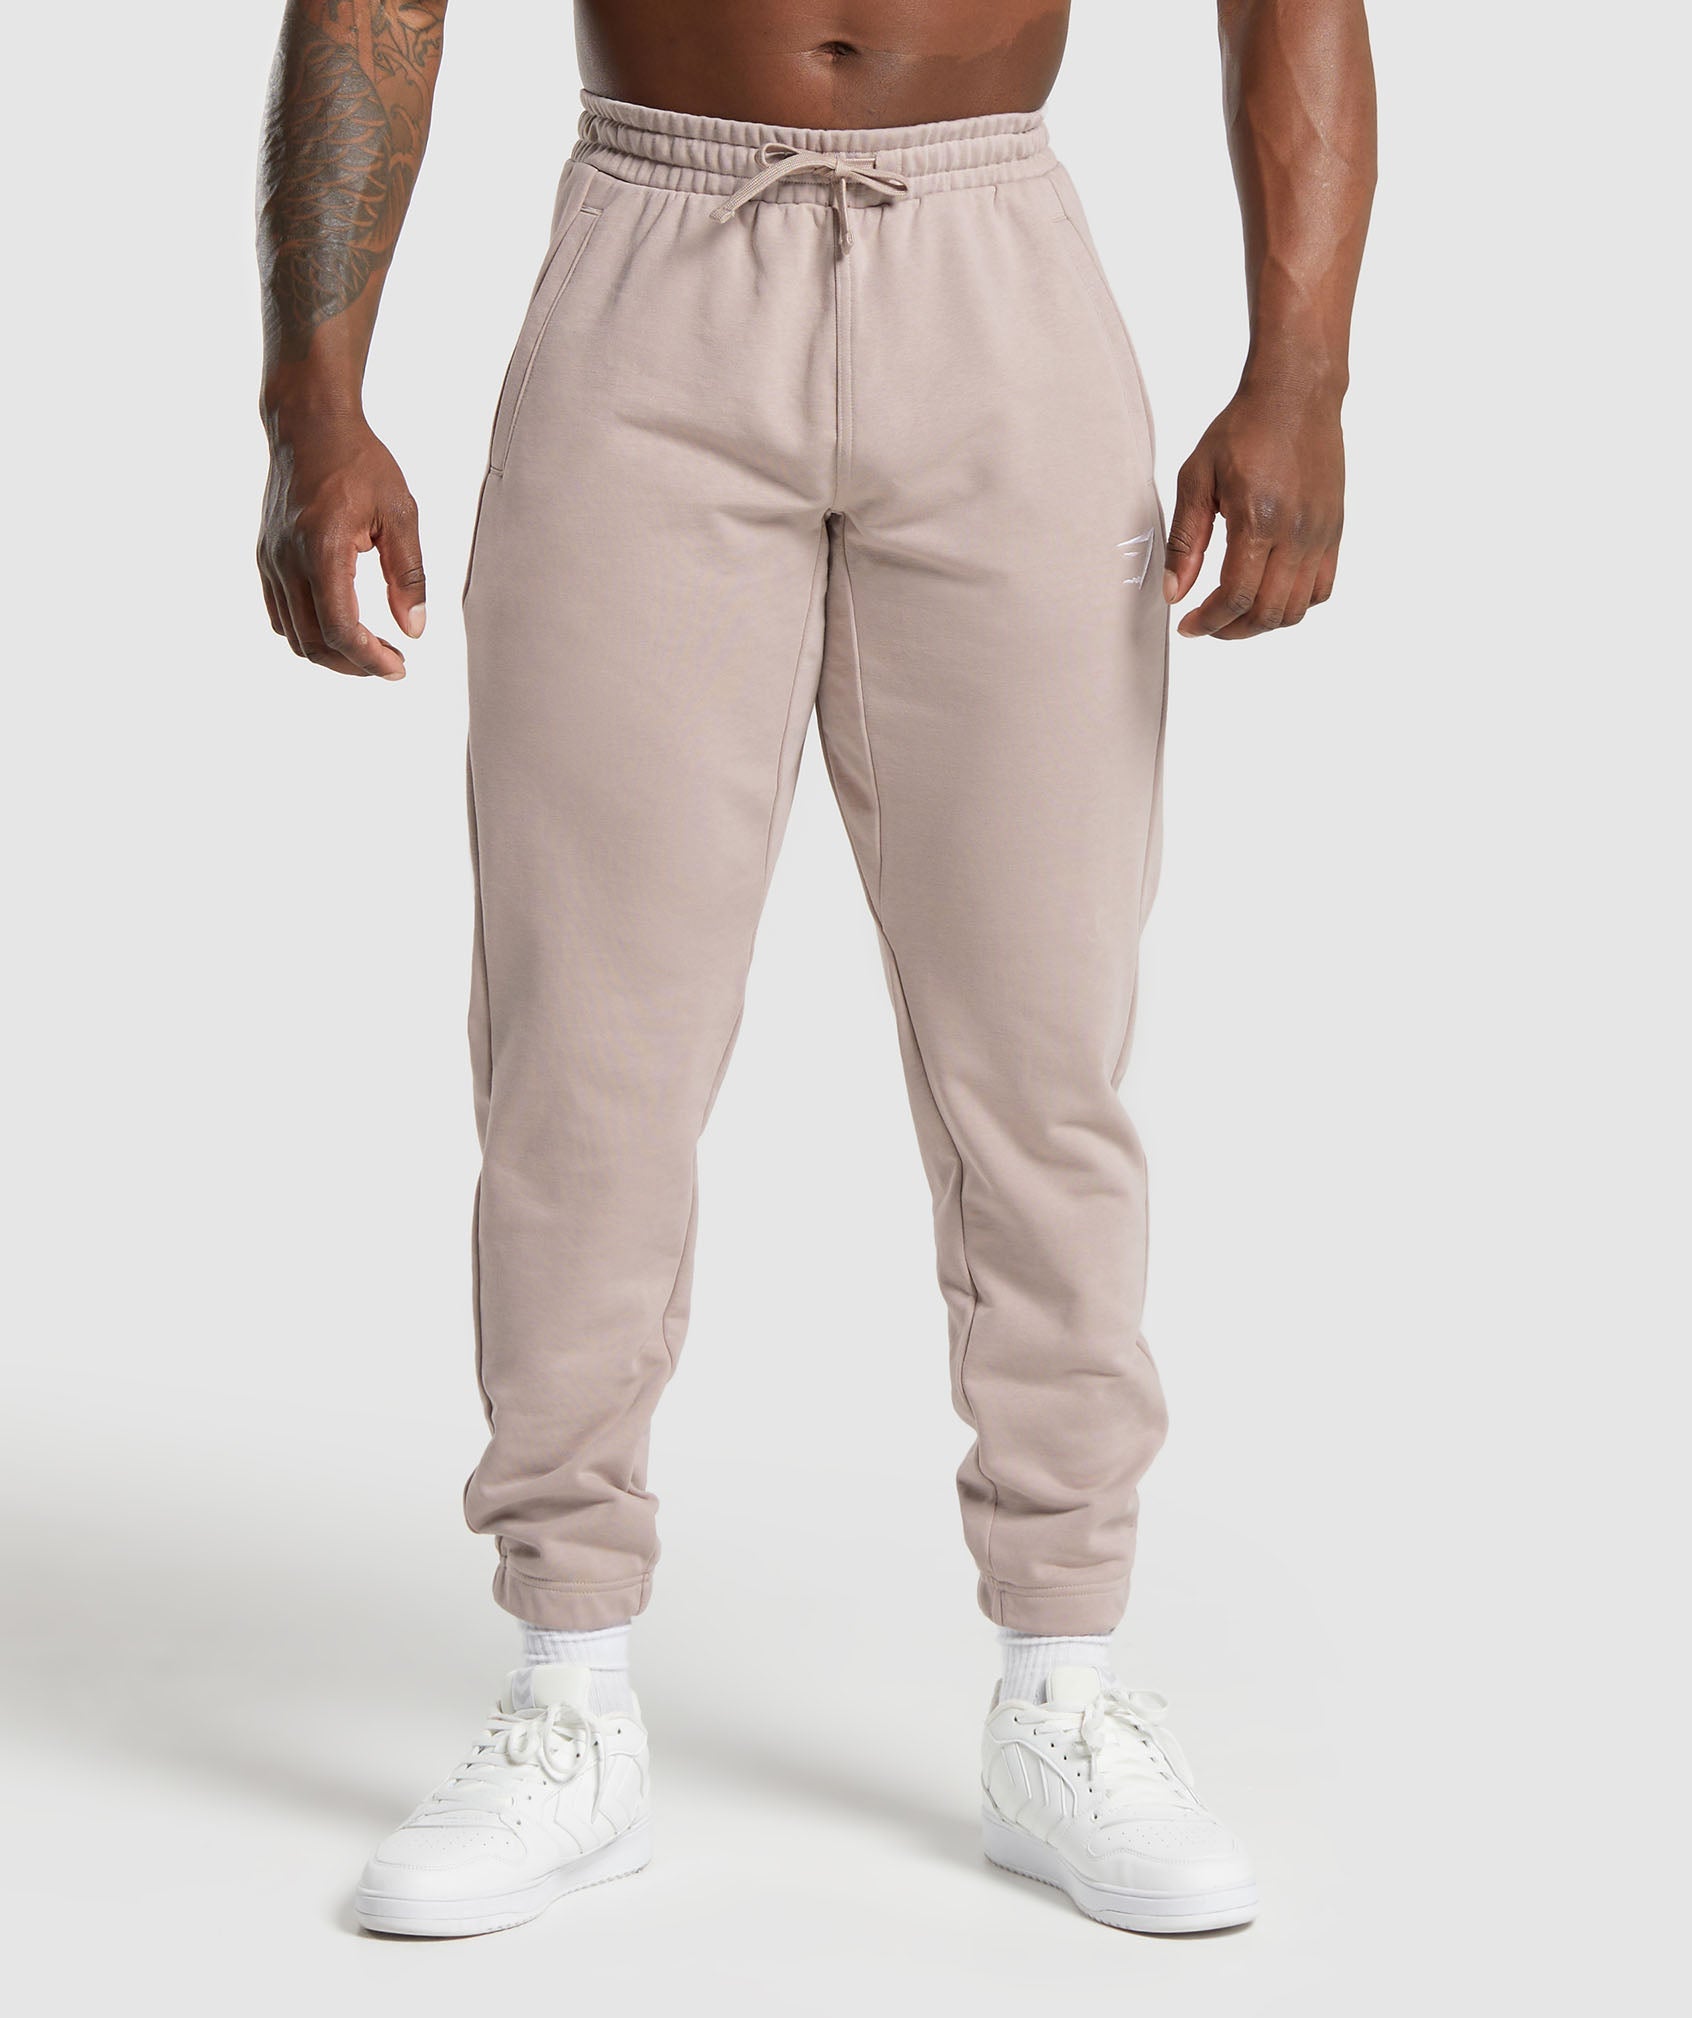 Essential Oversized Joggers in Stone Pink is out of stock